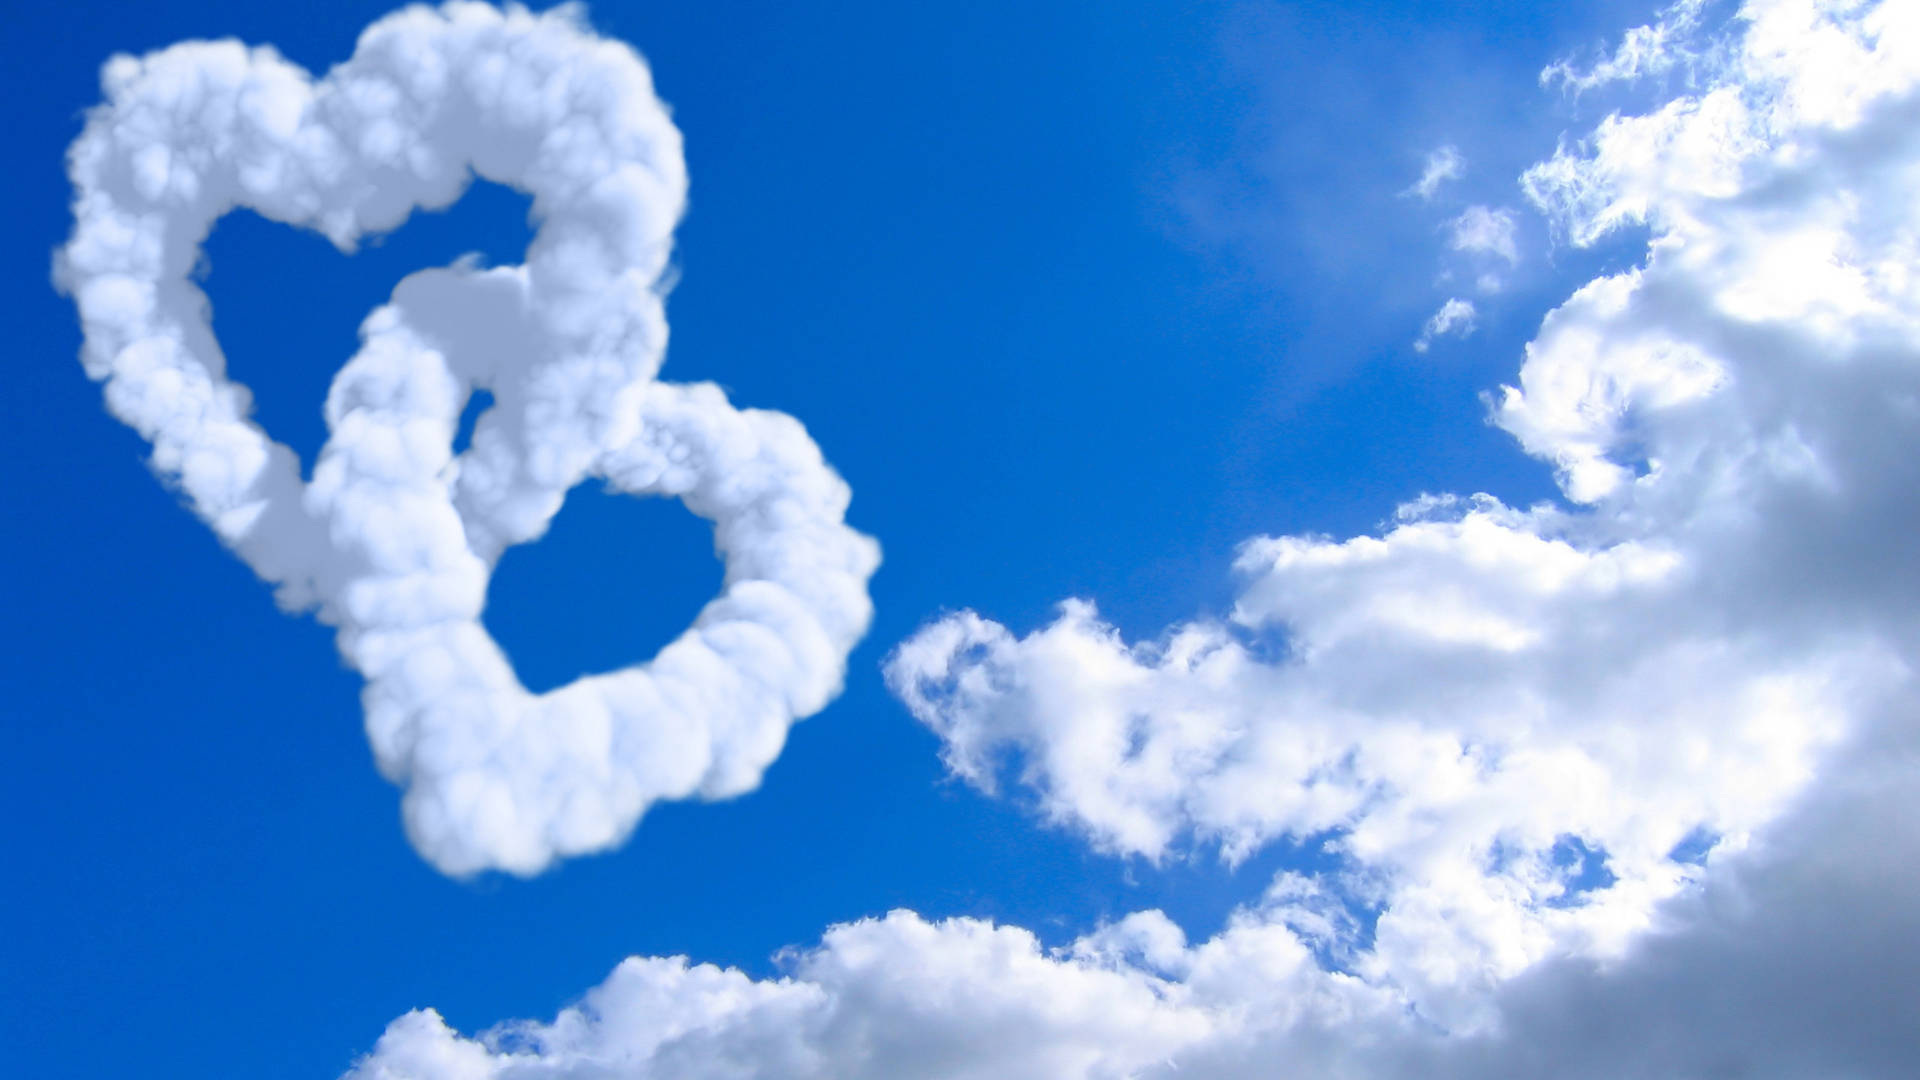 Sky With Heart Cloud Background